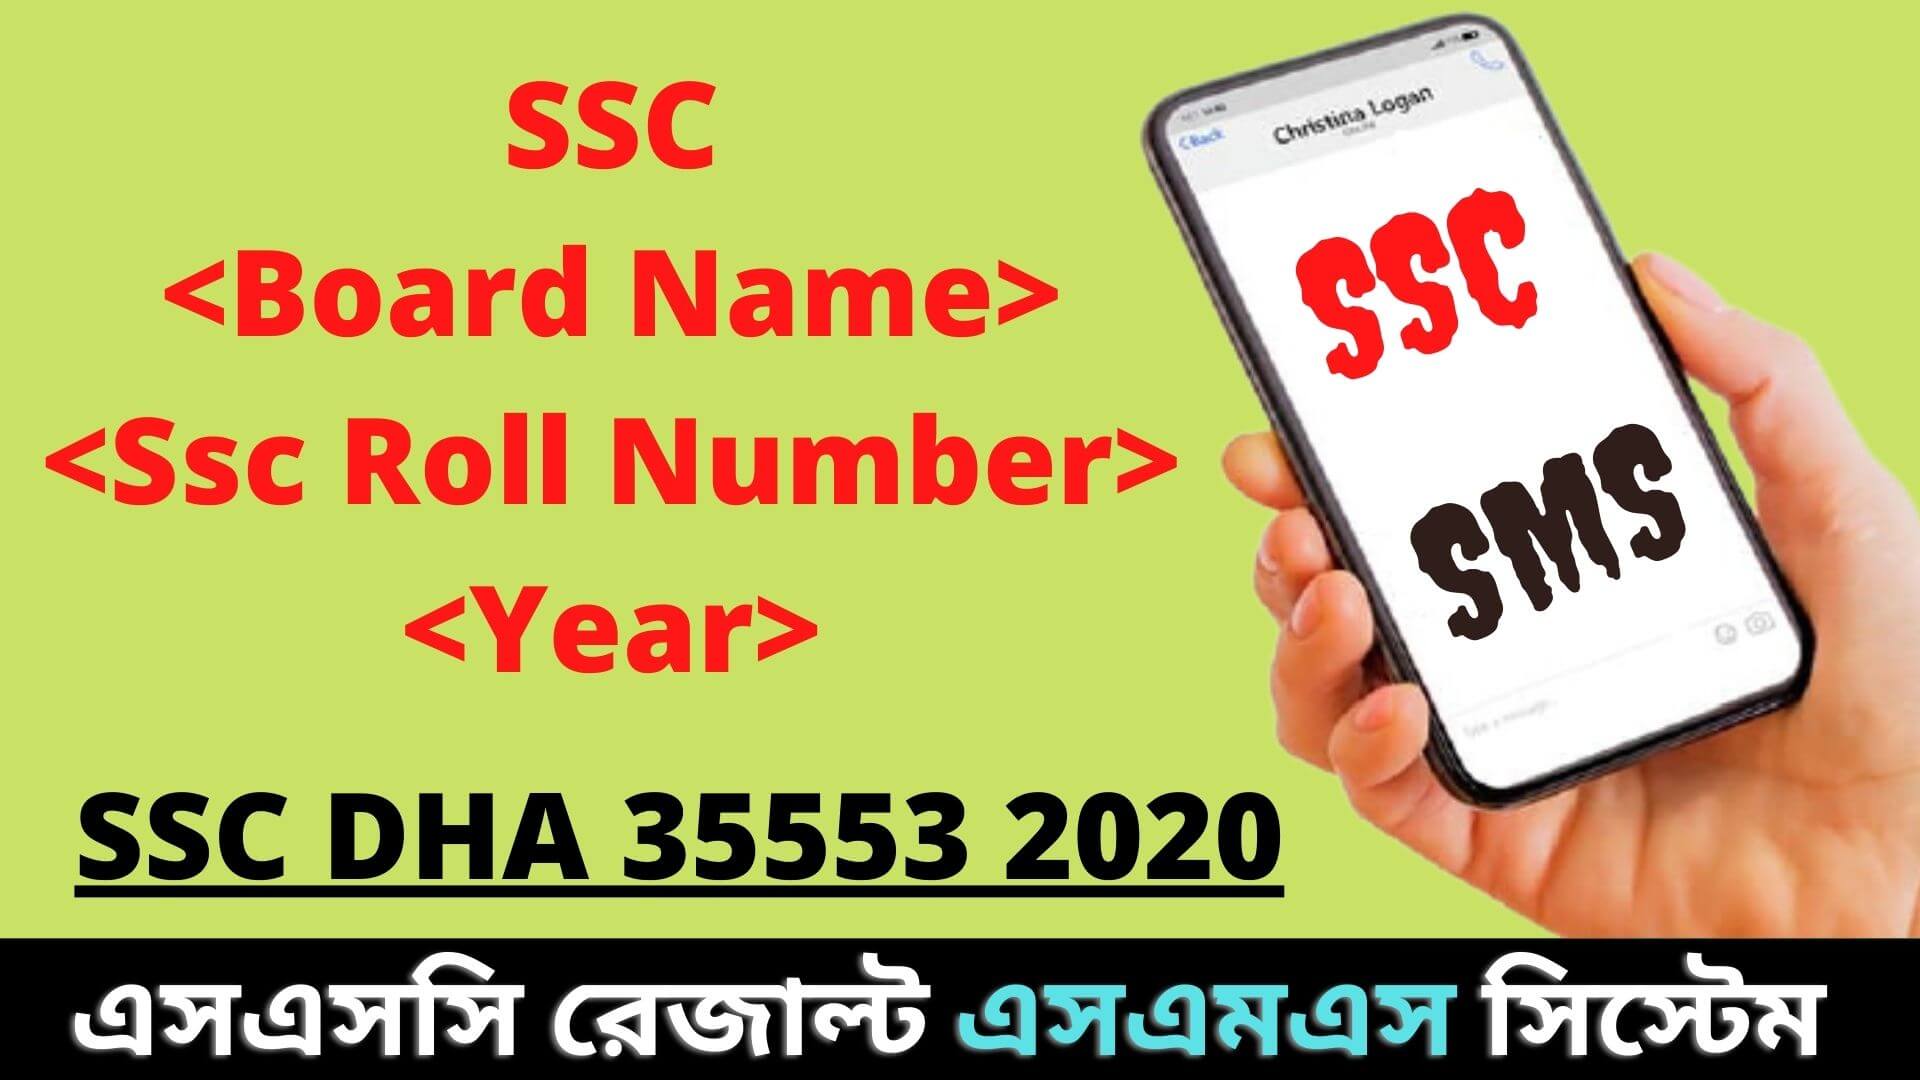 How to get SSC results by SMS